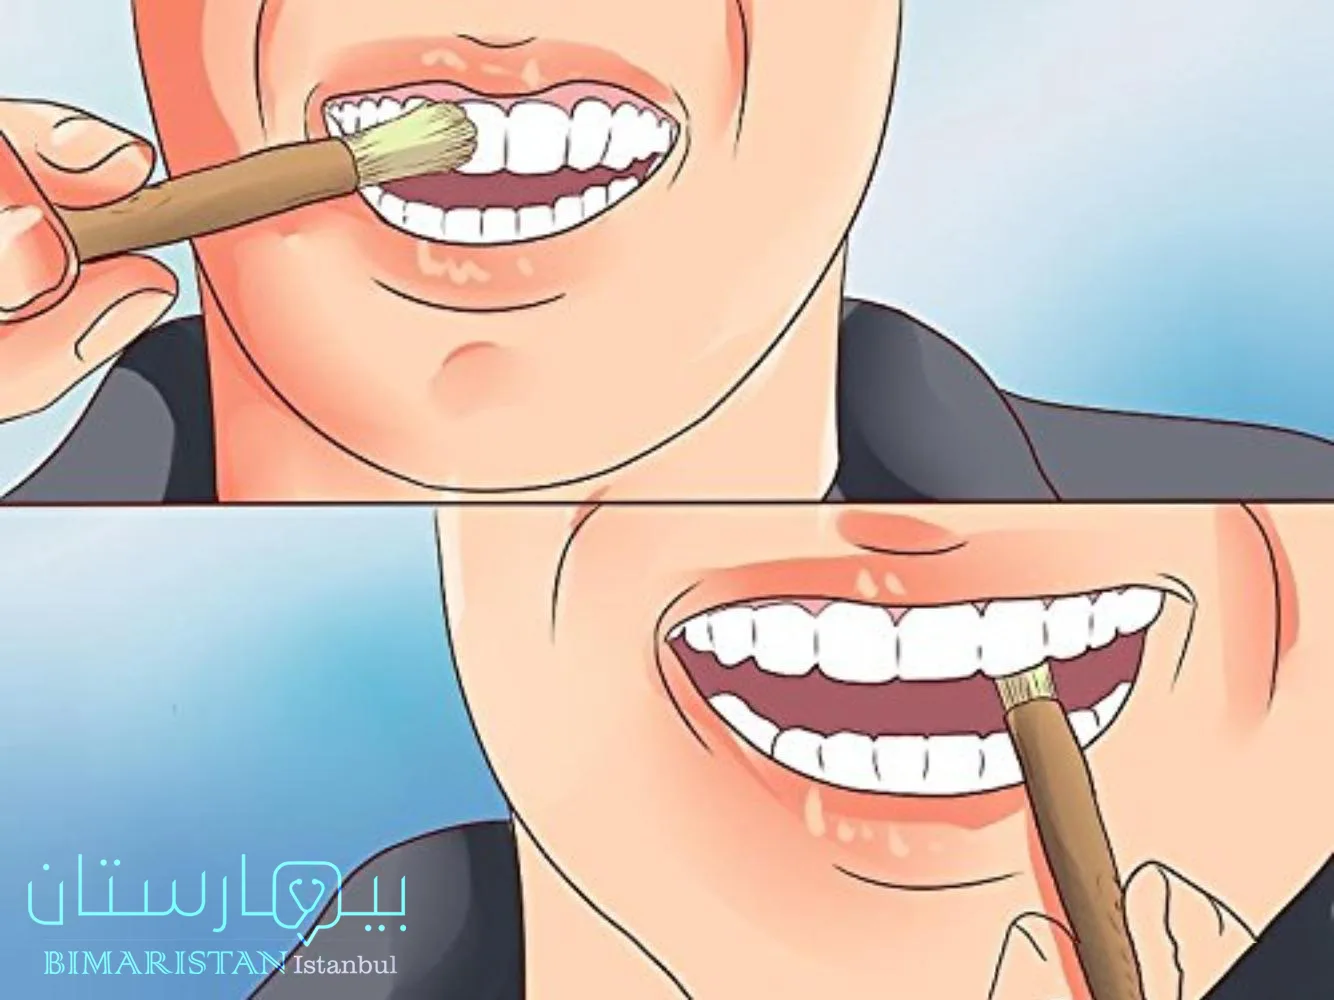 How to use the miswak